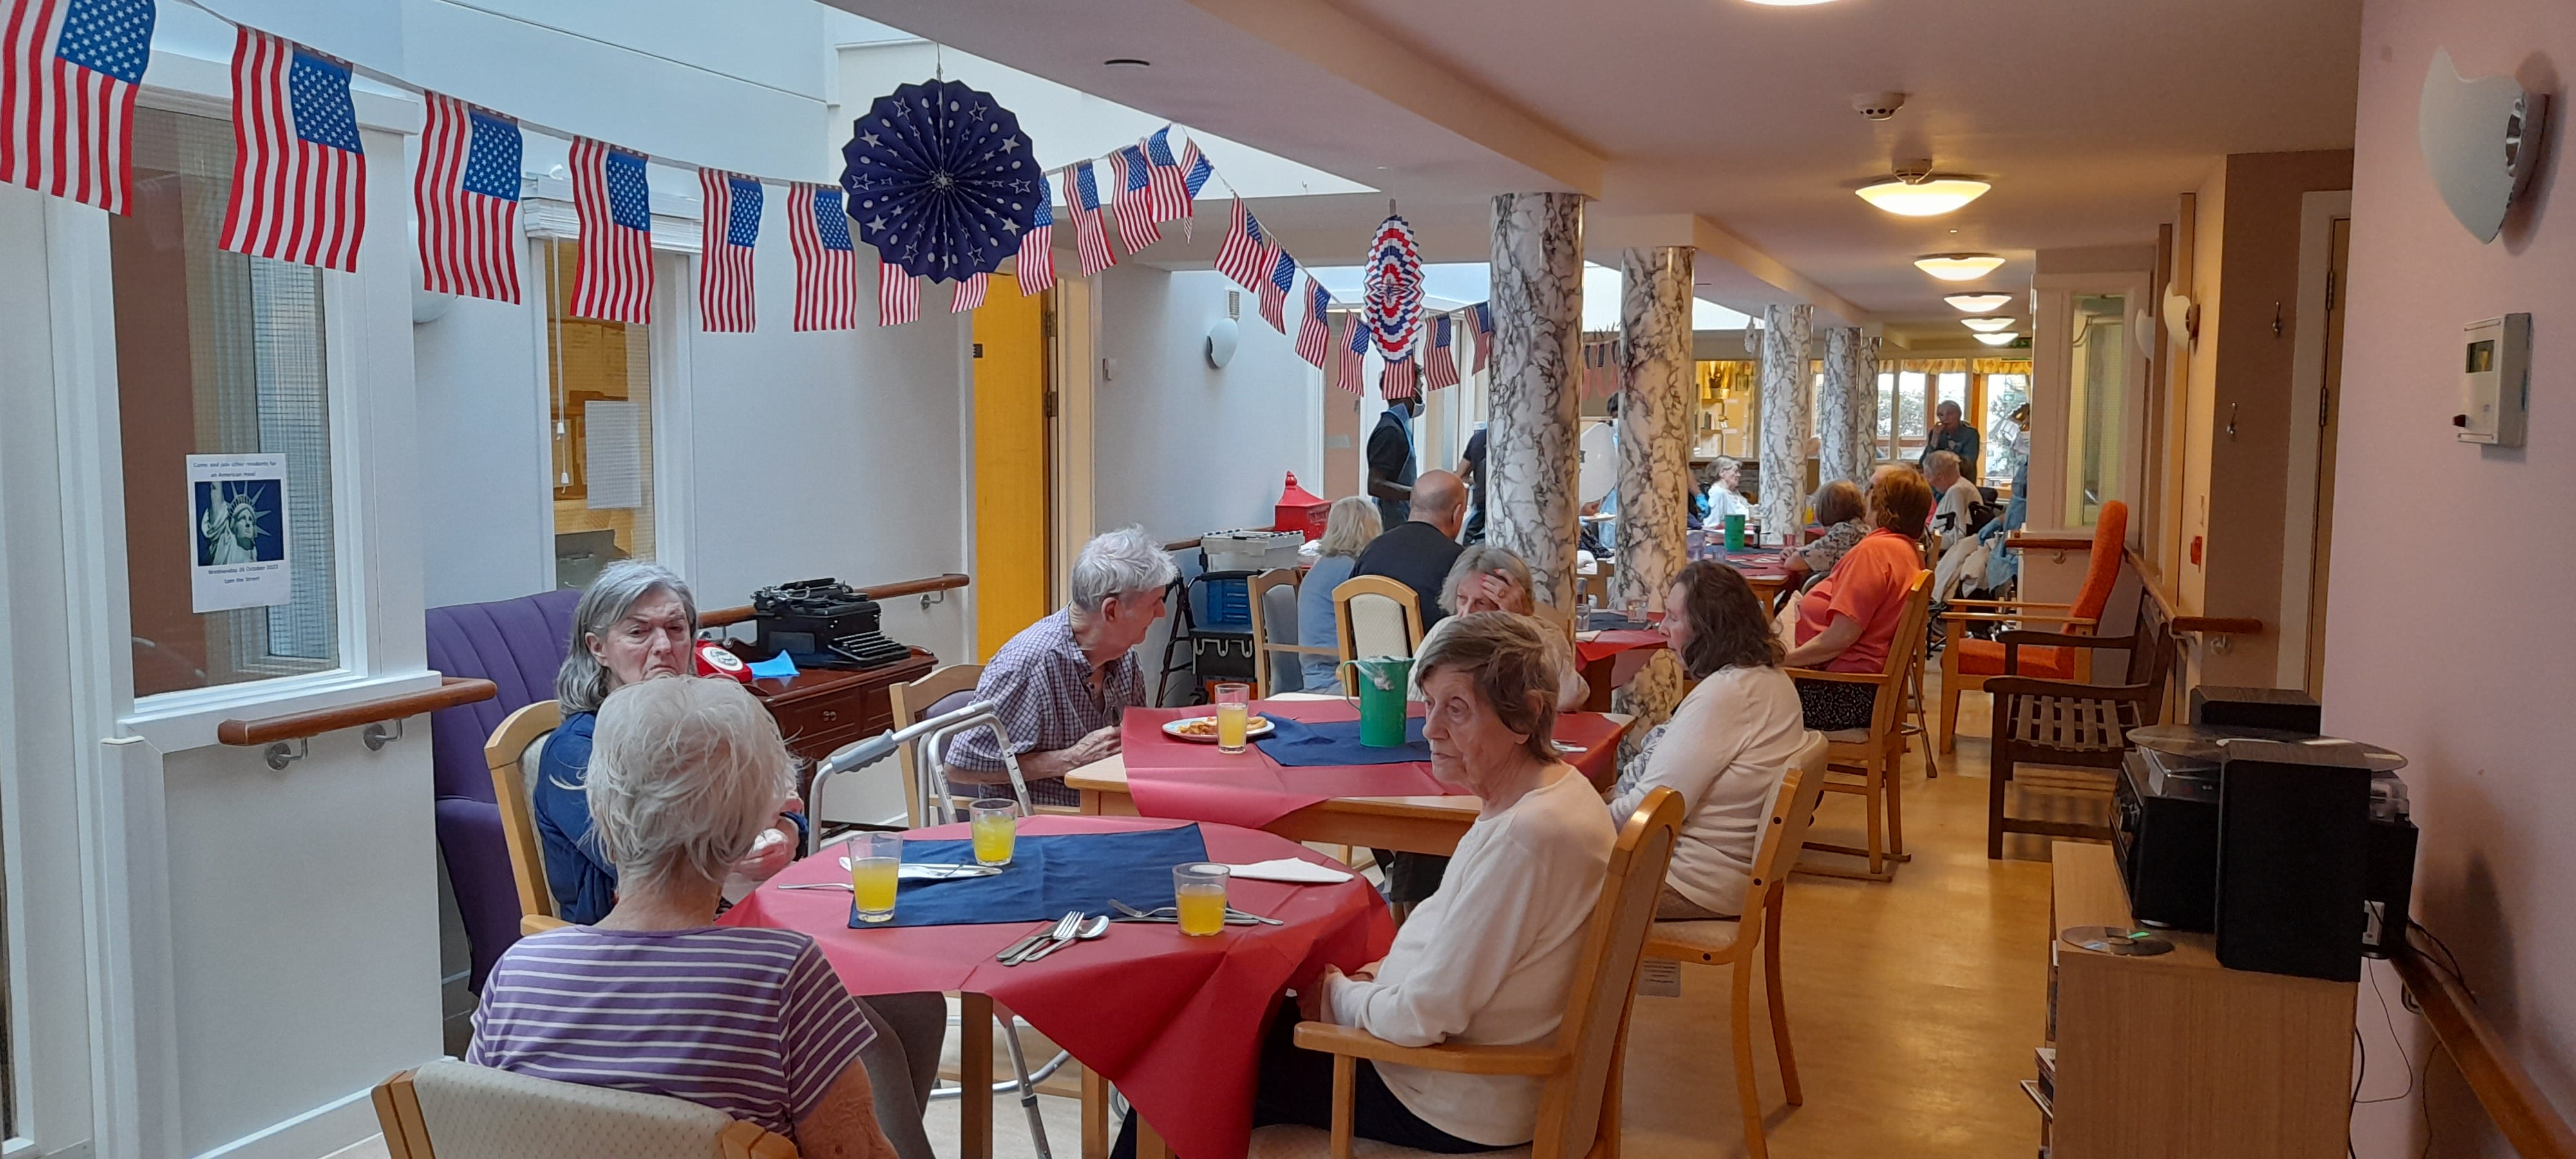 Rotherlea residents enjoying an American themed meal